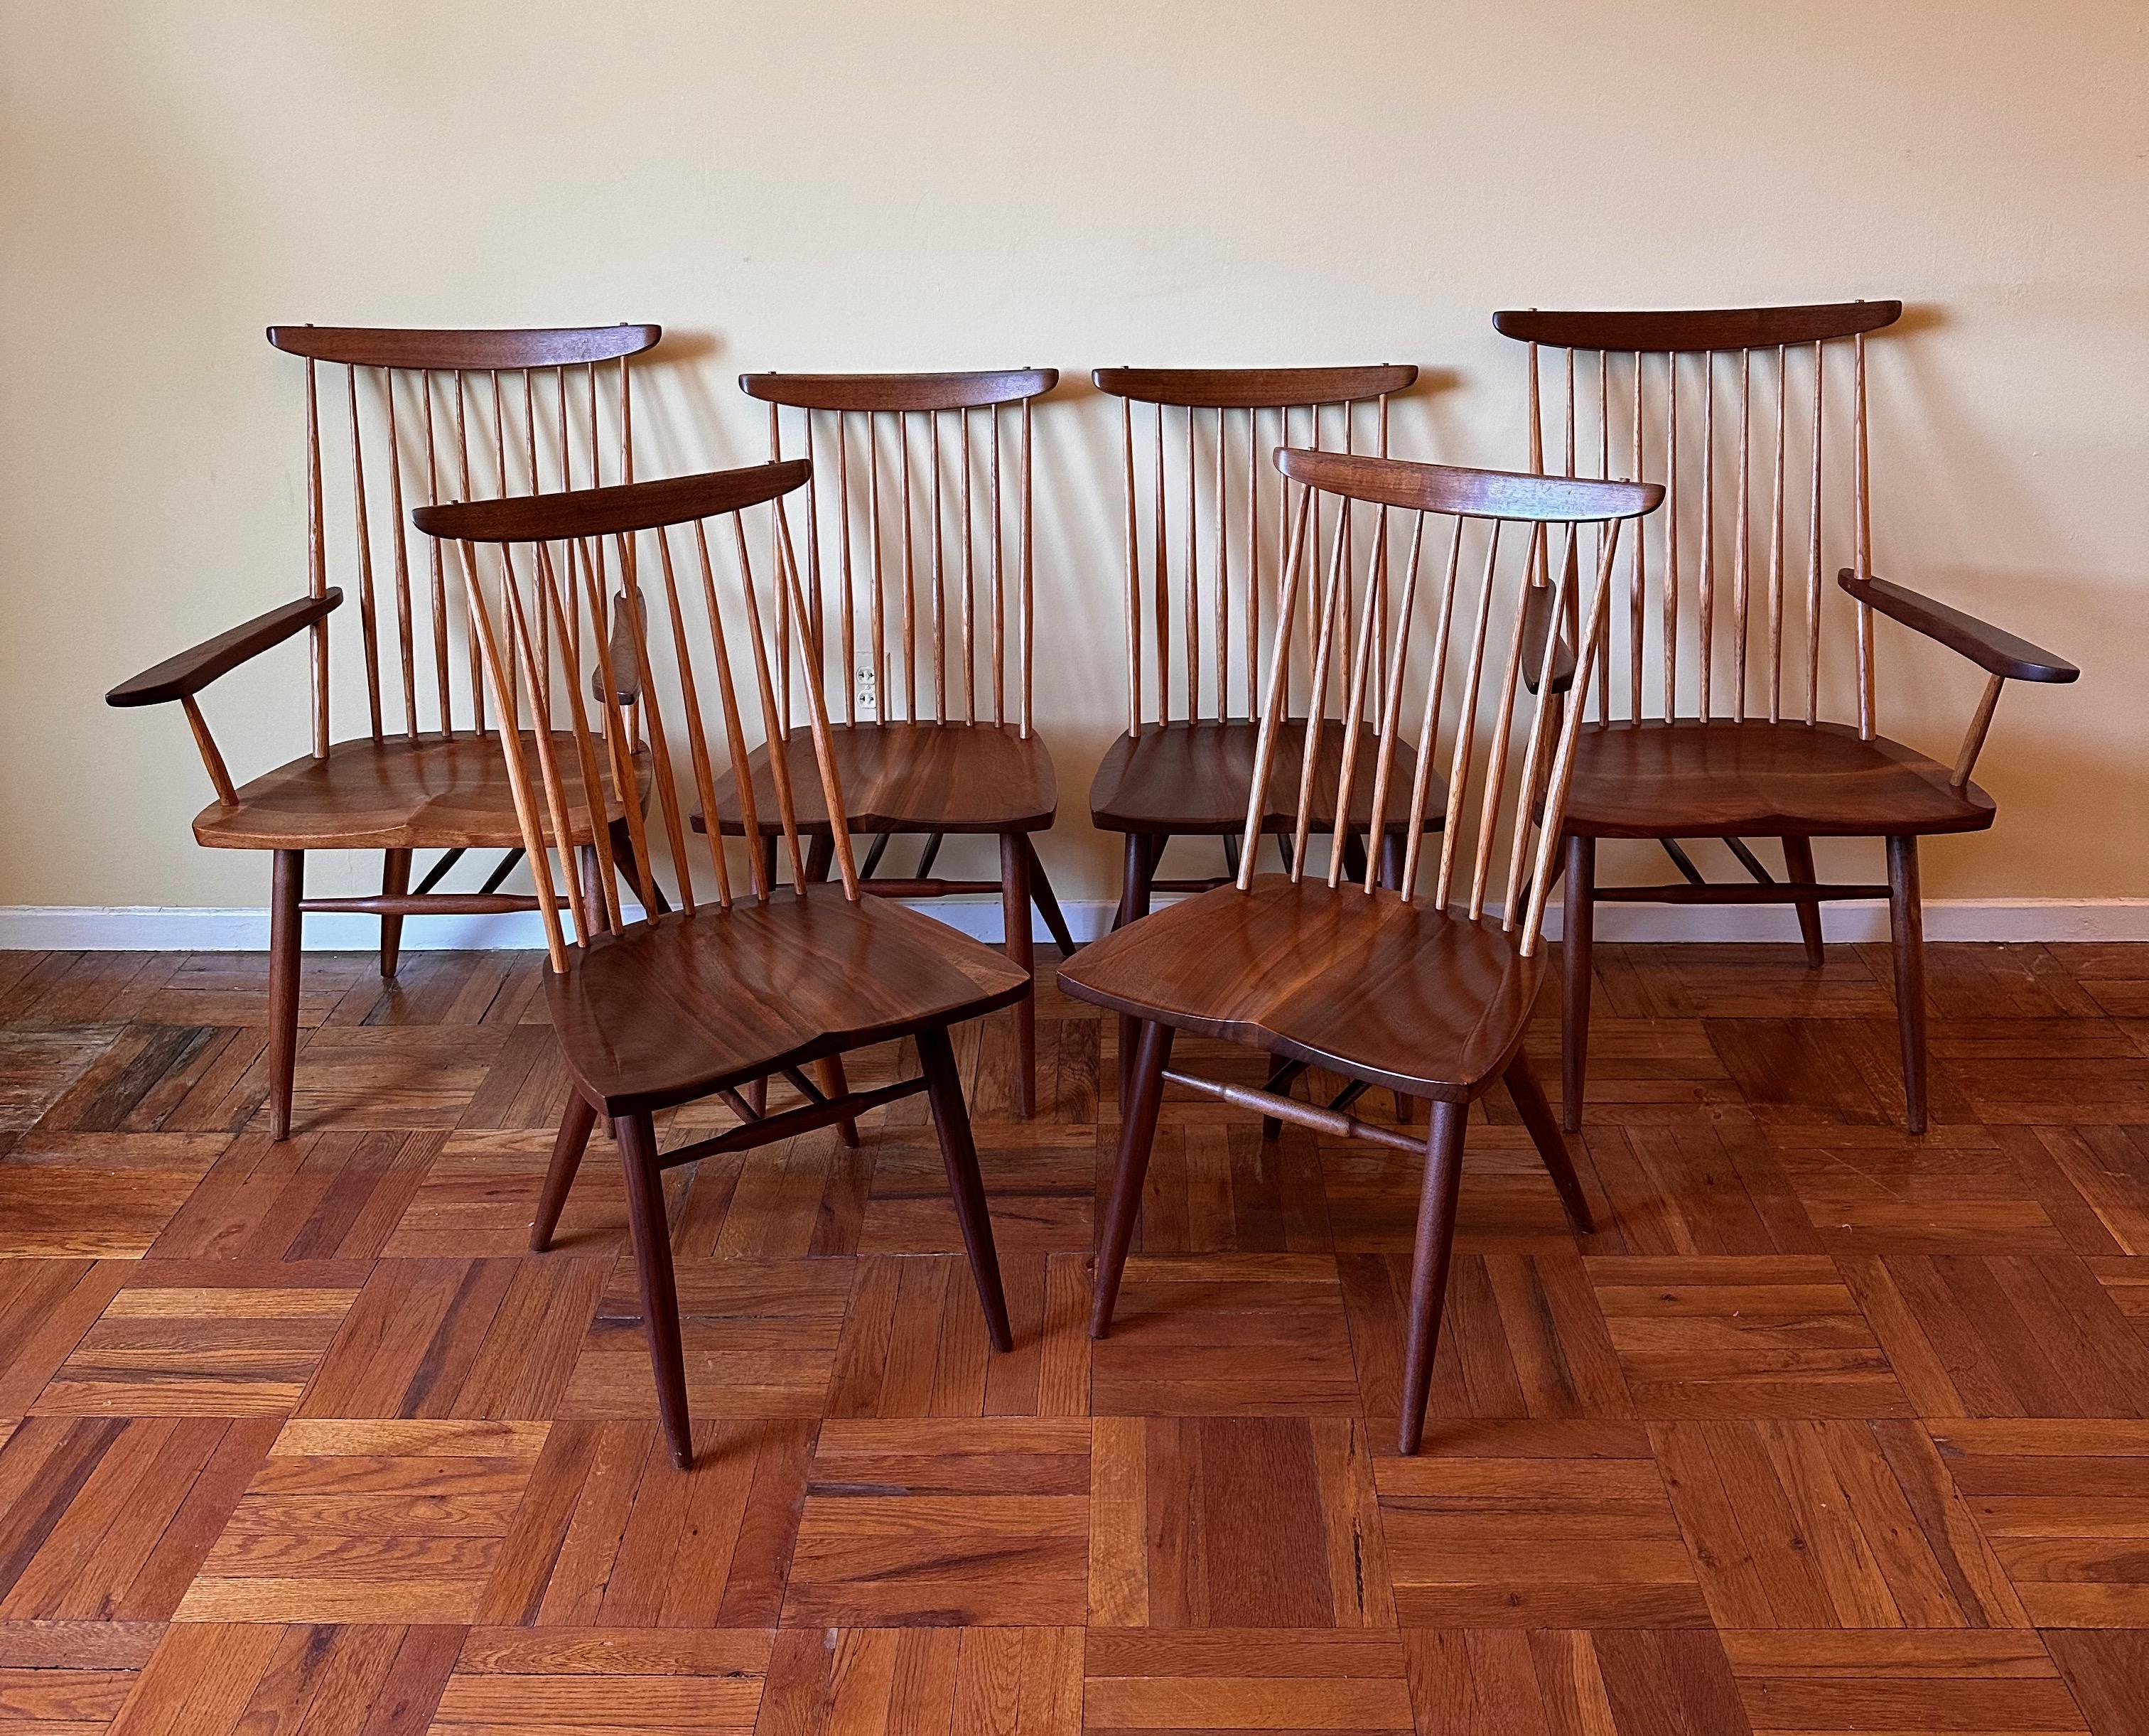 
Iconic design by master woodworker/artist George Nakashima. The New chair was debuted in 1956, this set, from 1978 includes two armchairs and four side chairs. These chairs are being sold by the original owner and are matched with an 8